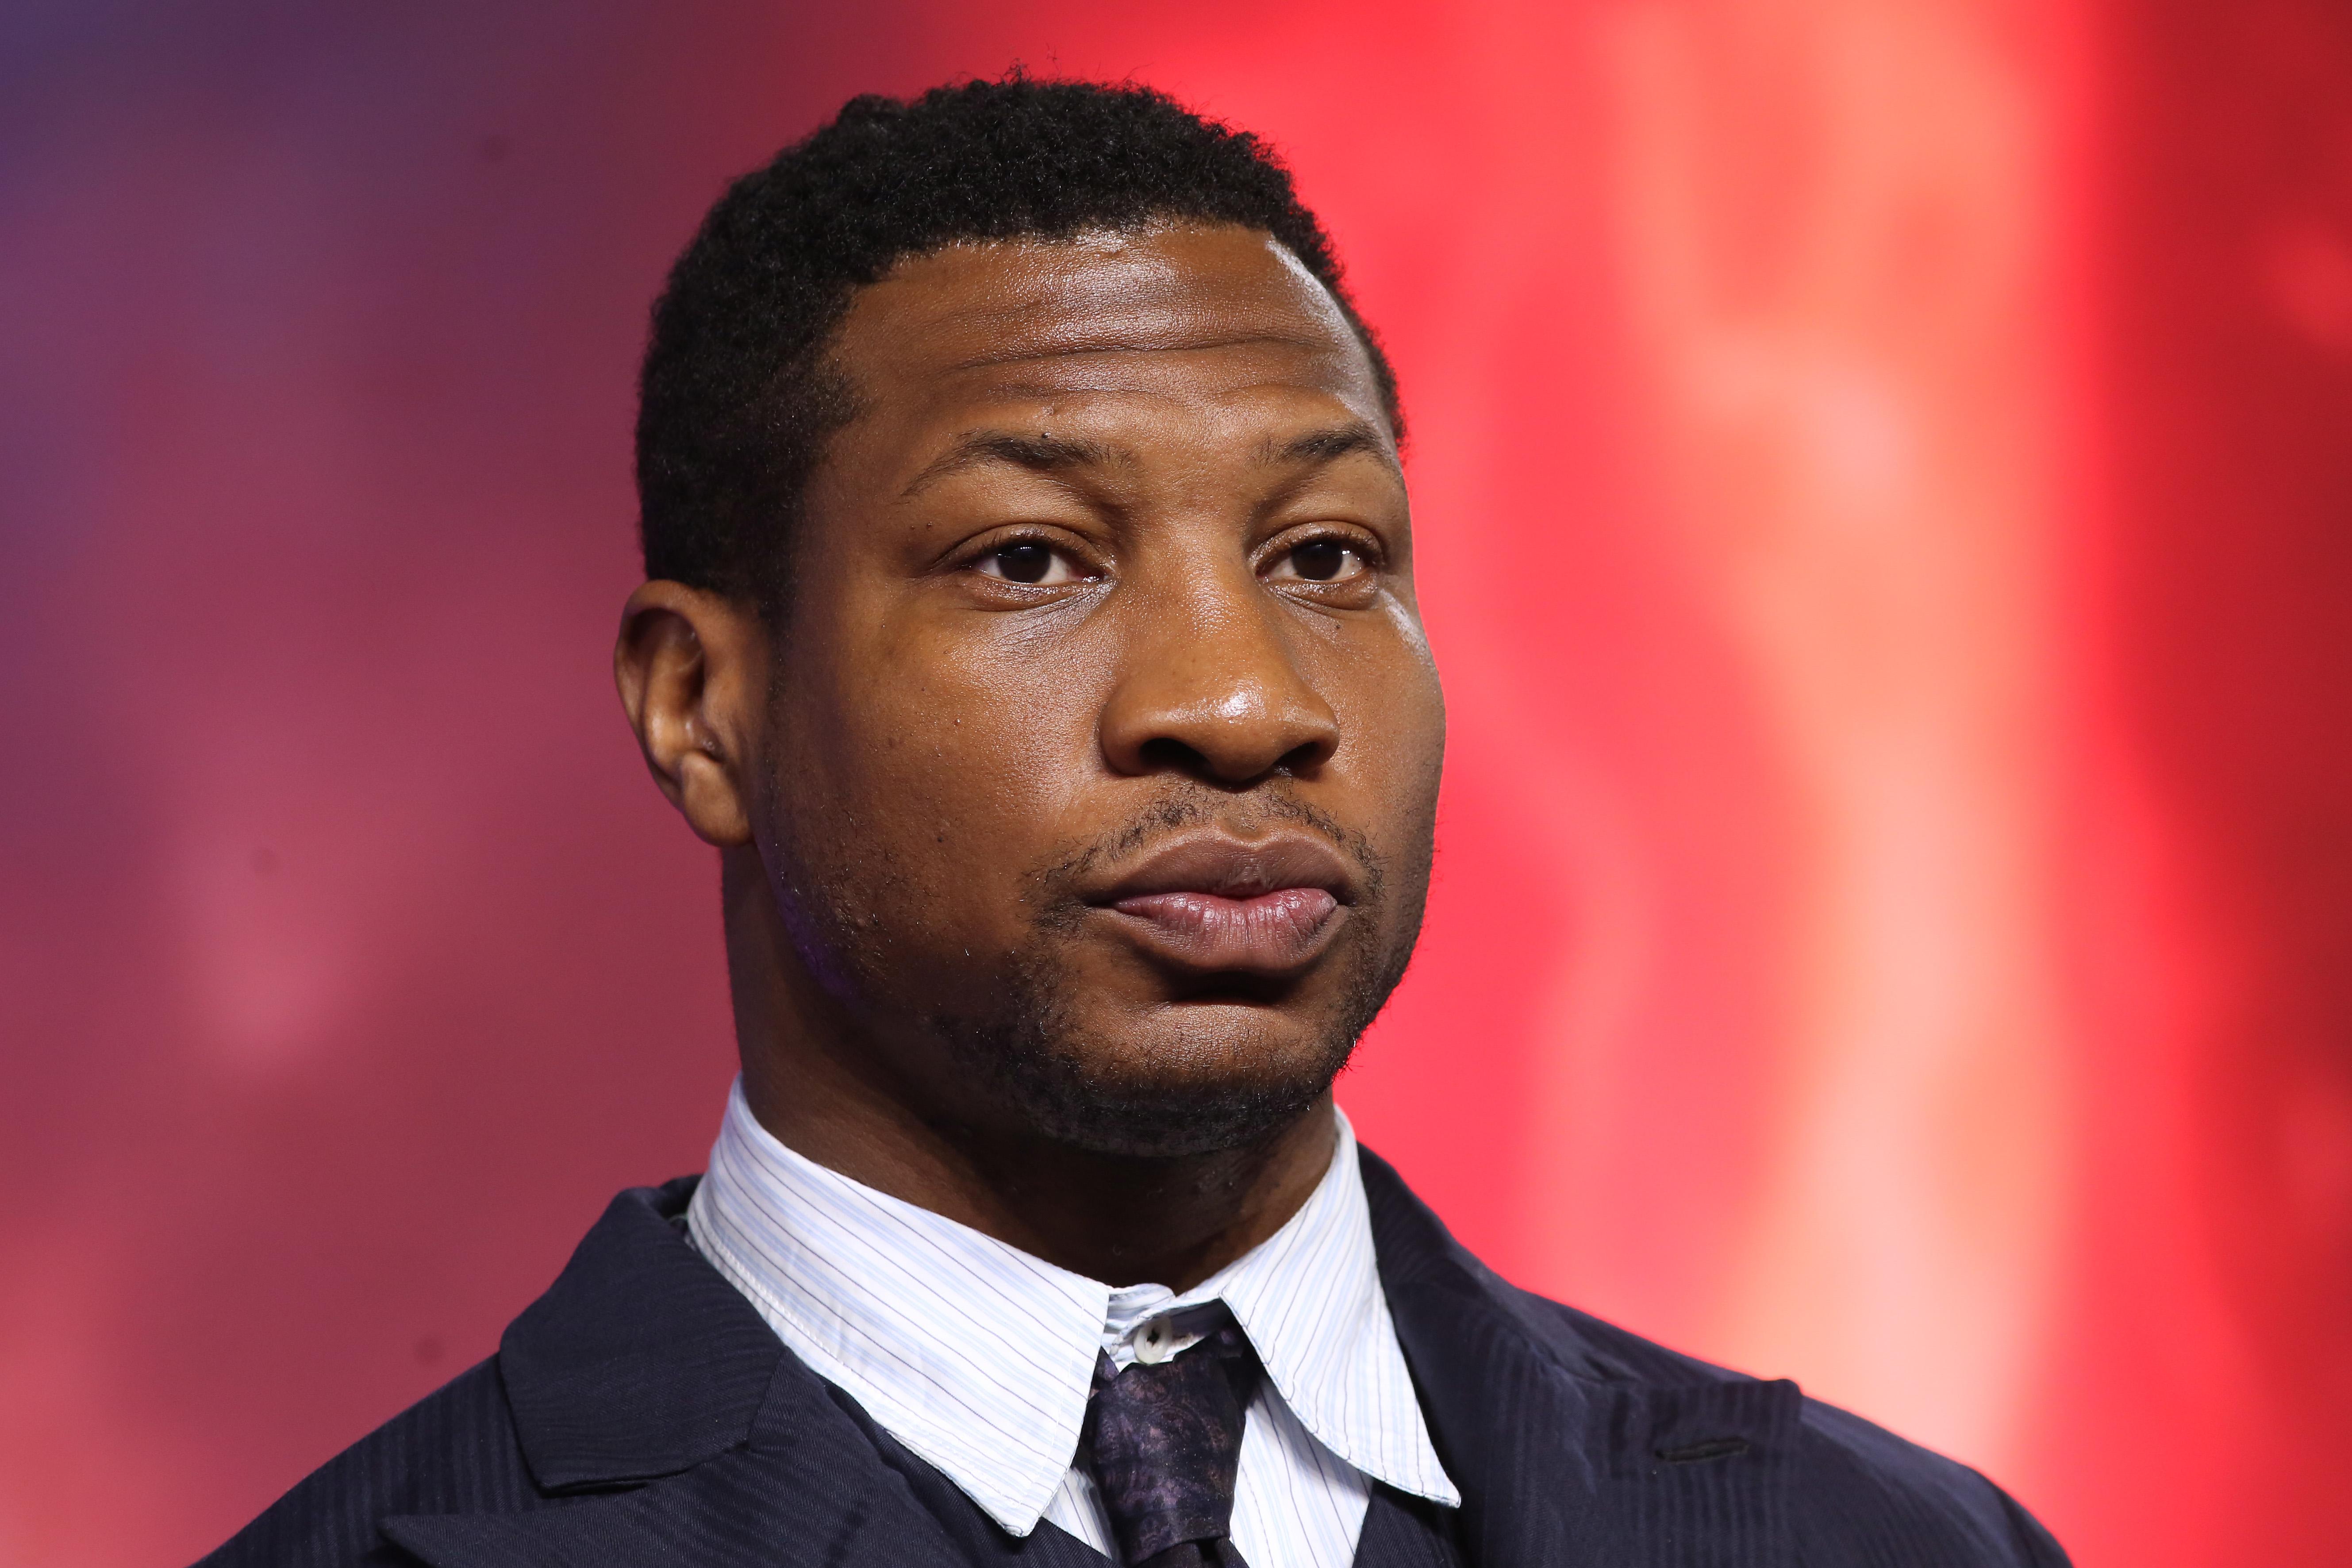 Jonathan Majors in a black suit onstage.